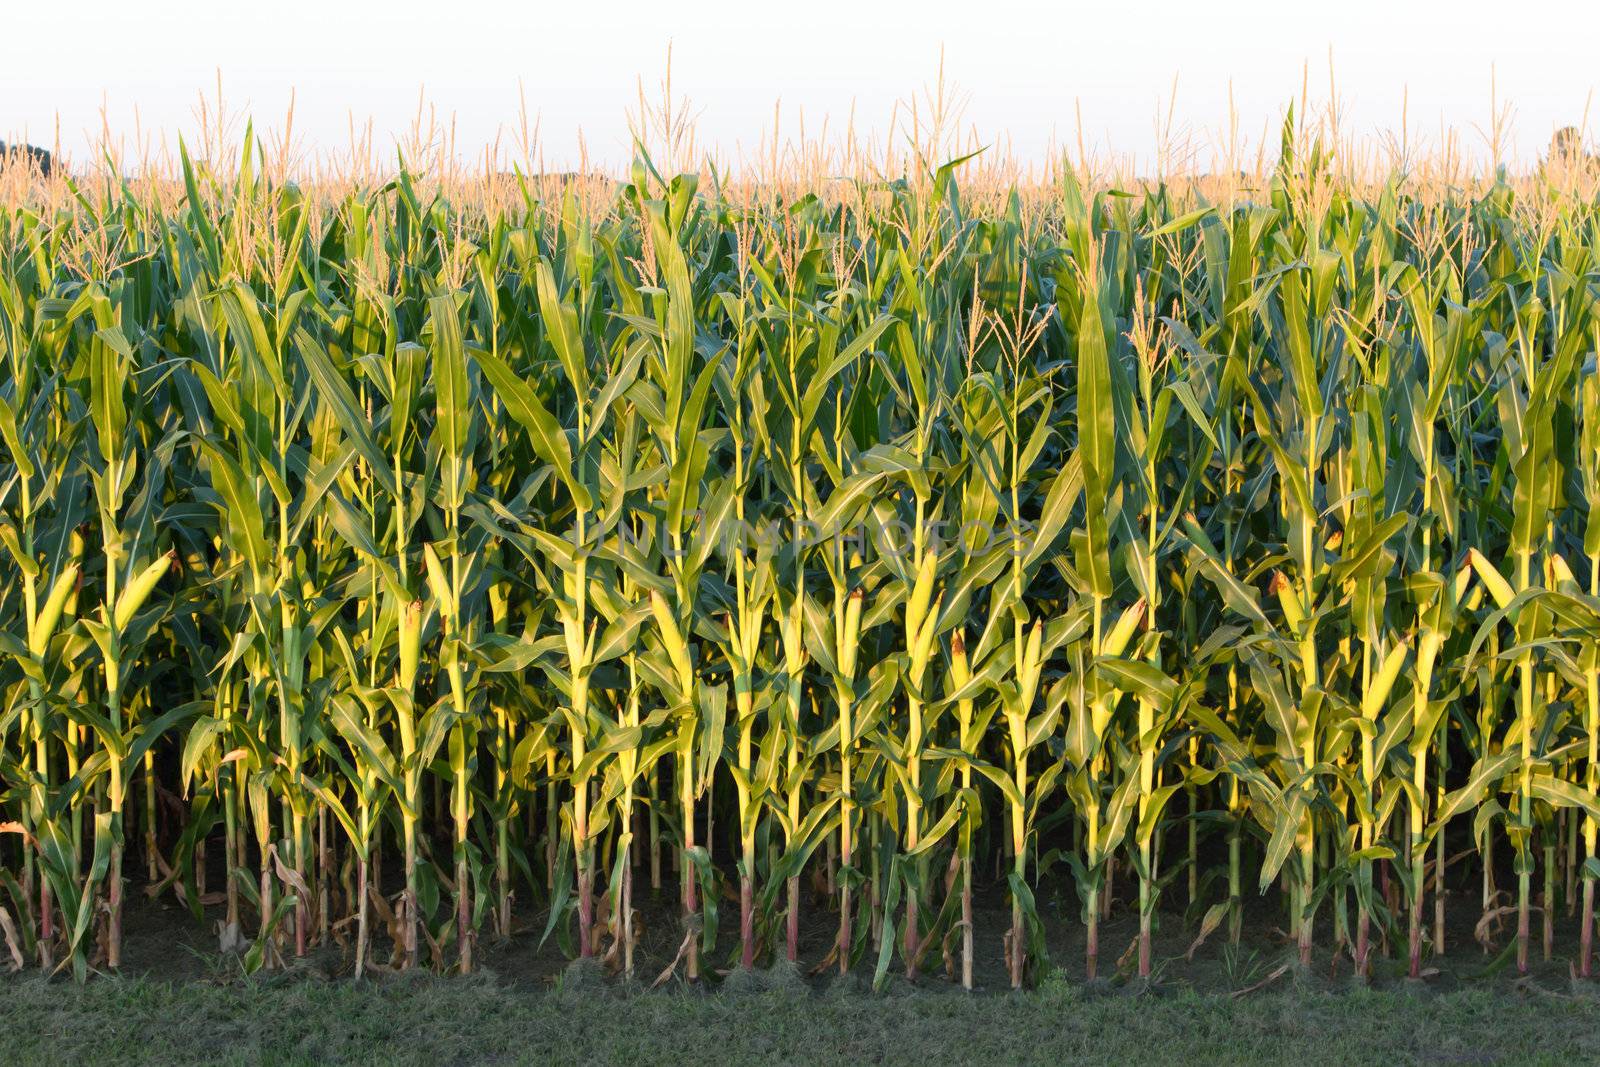 A tall row of field corn is nearly ready for harvest.